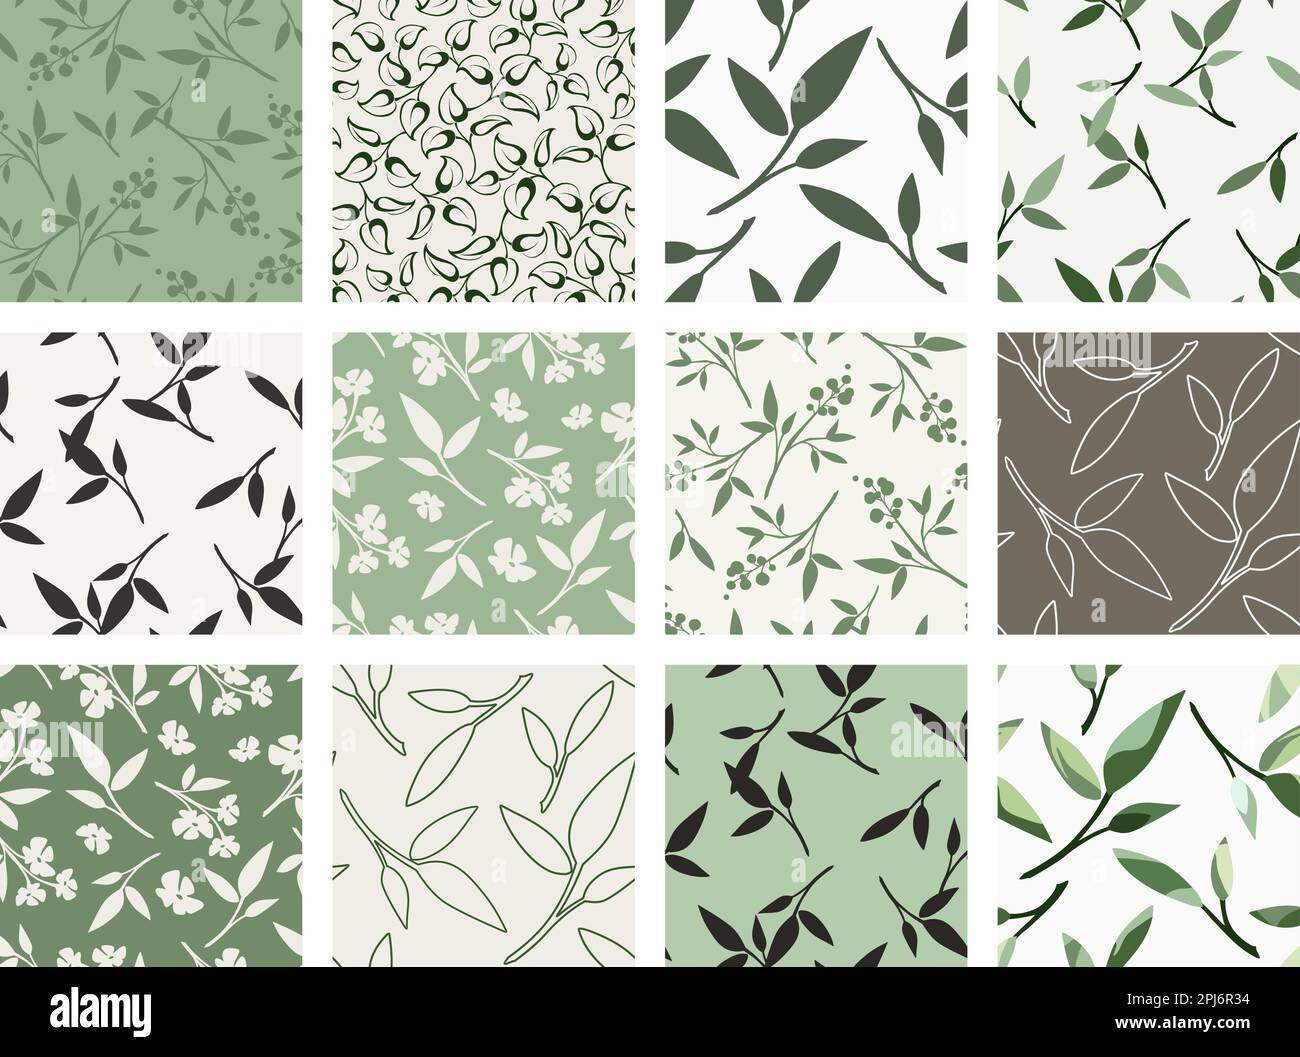 Seamless floral patterns with flowers and leaves. Set of seamless floral backgrounds in natural green, beige, and white colors. Vector seamless prints Stock Vector